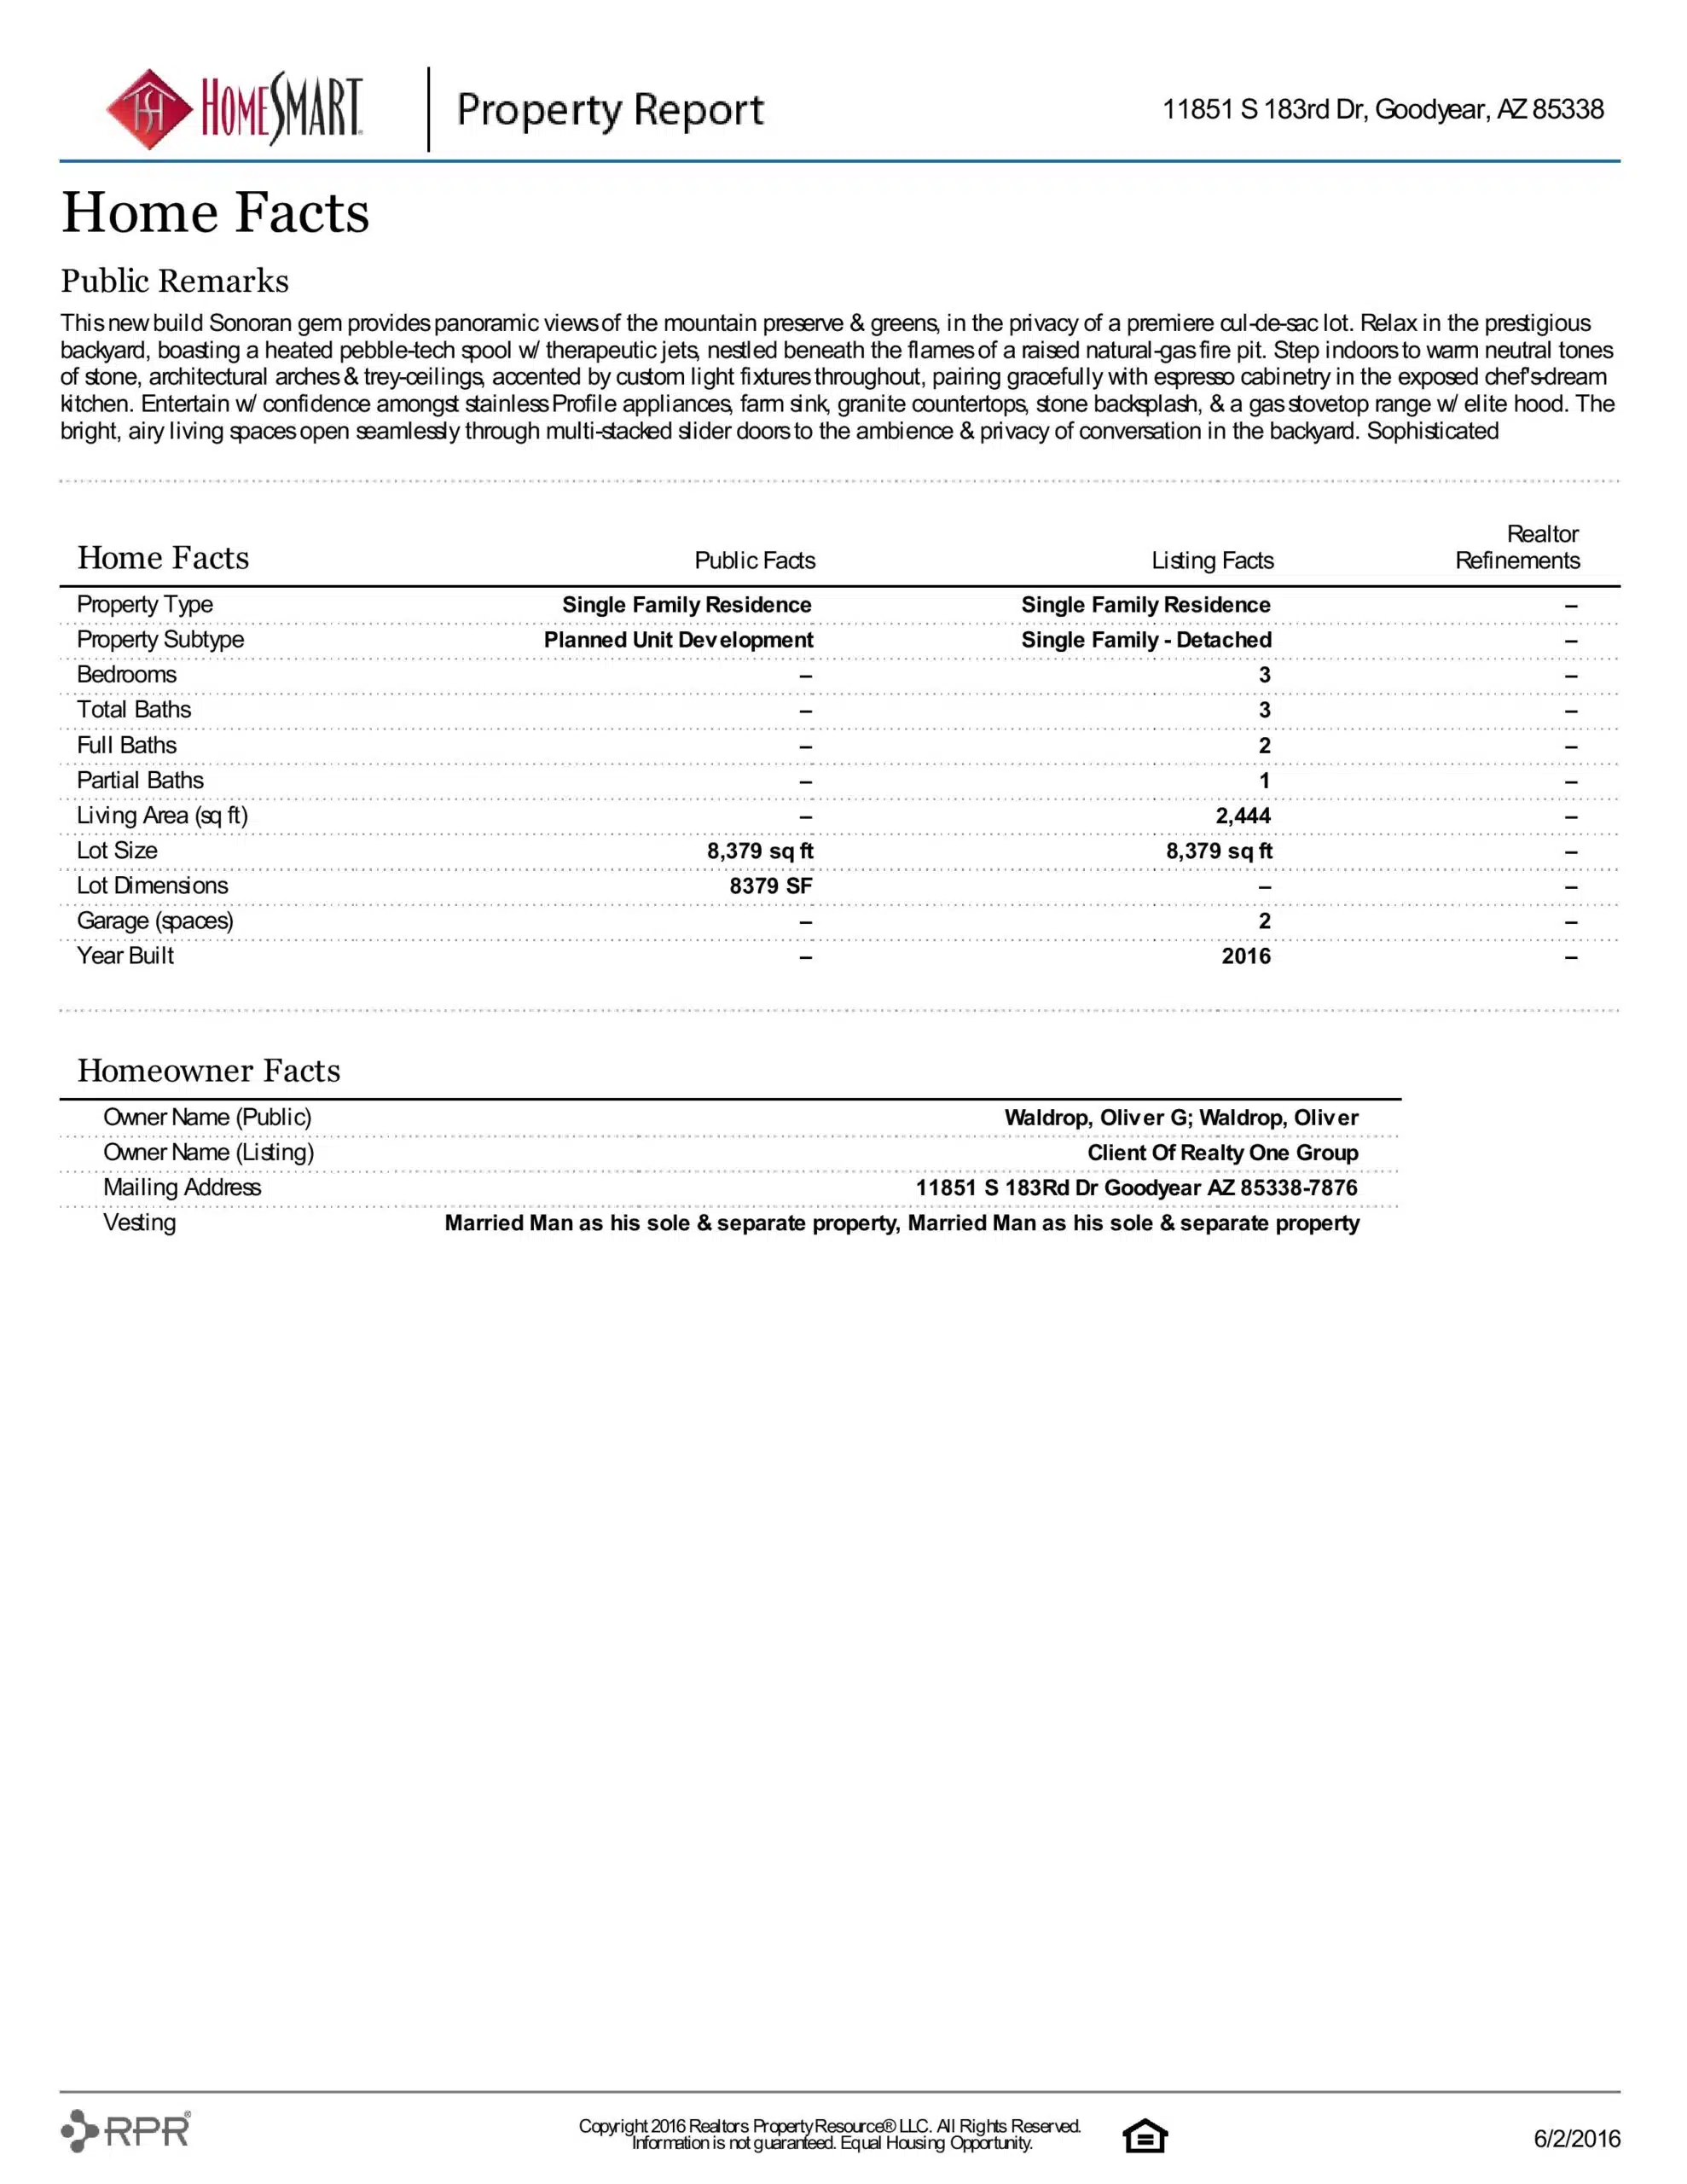 11851 S 183RD DR PROPERTY REPORT-page-003